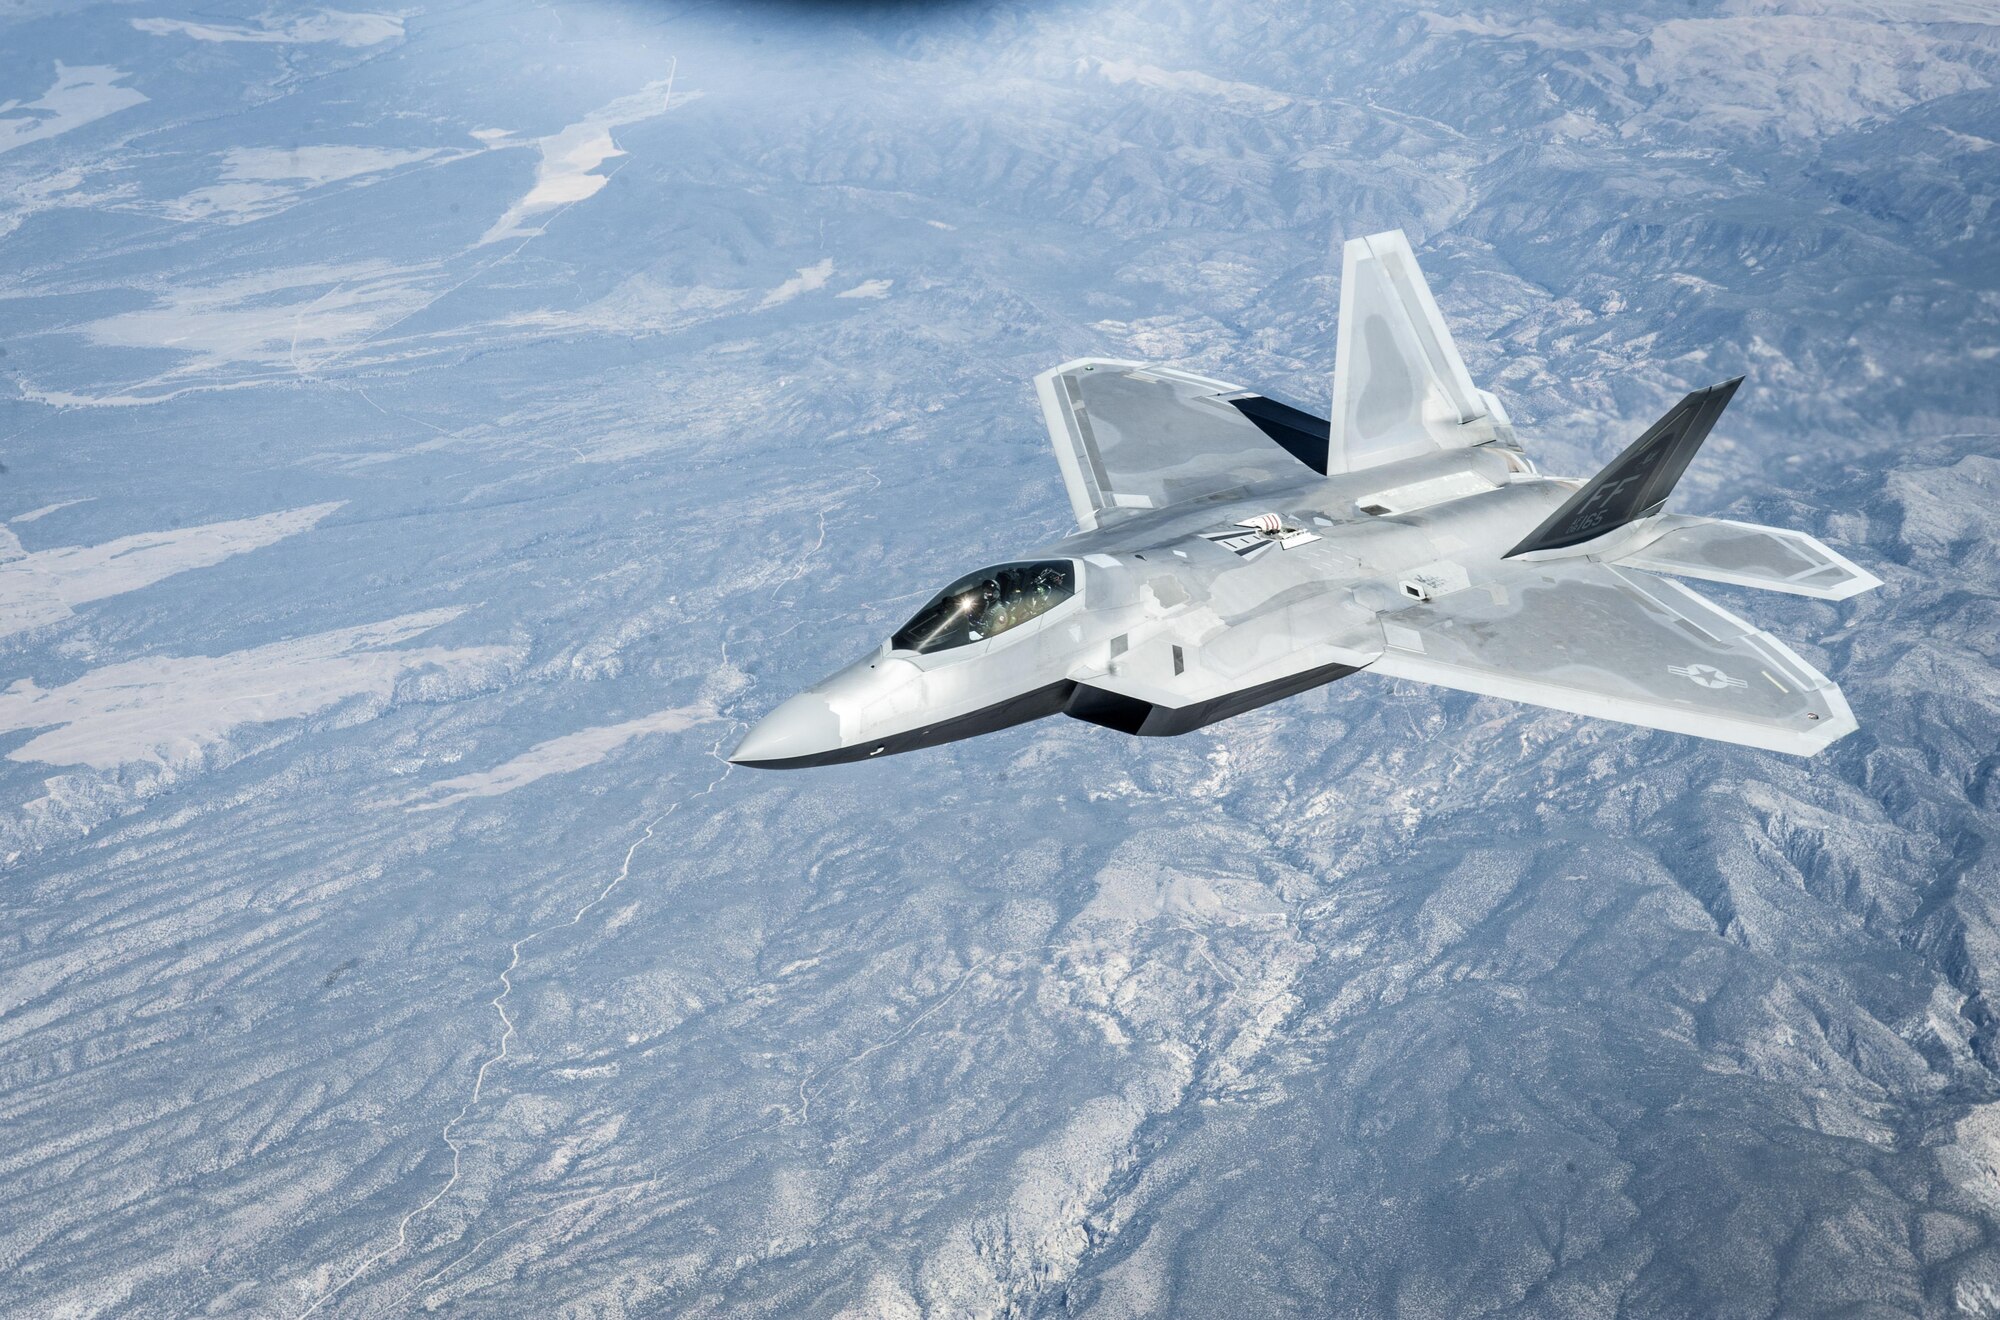 An F-22A Raptor assigned to the 27th Fighter Squadron, Joint Base Langley-Eustis, Virginia, soars through the skies over the Nevada Test and Training Range during a Red Flag 16-3 training sortie July 22, 2016 at Nellis AFB, Nev. The F-22, a critical component of the Global Strike Task Force, is designed to project air dominance, rapidly and at great distances and defeat threats attempting to deny access to our nation's Air Force, Army, Navy and Marine Corps. The F-22 cannot be matched by any known or projected fighter aircraft. (U.S. Air Force photo by Senior Airman Joshua Kleinholz)